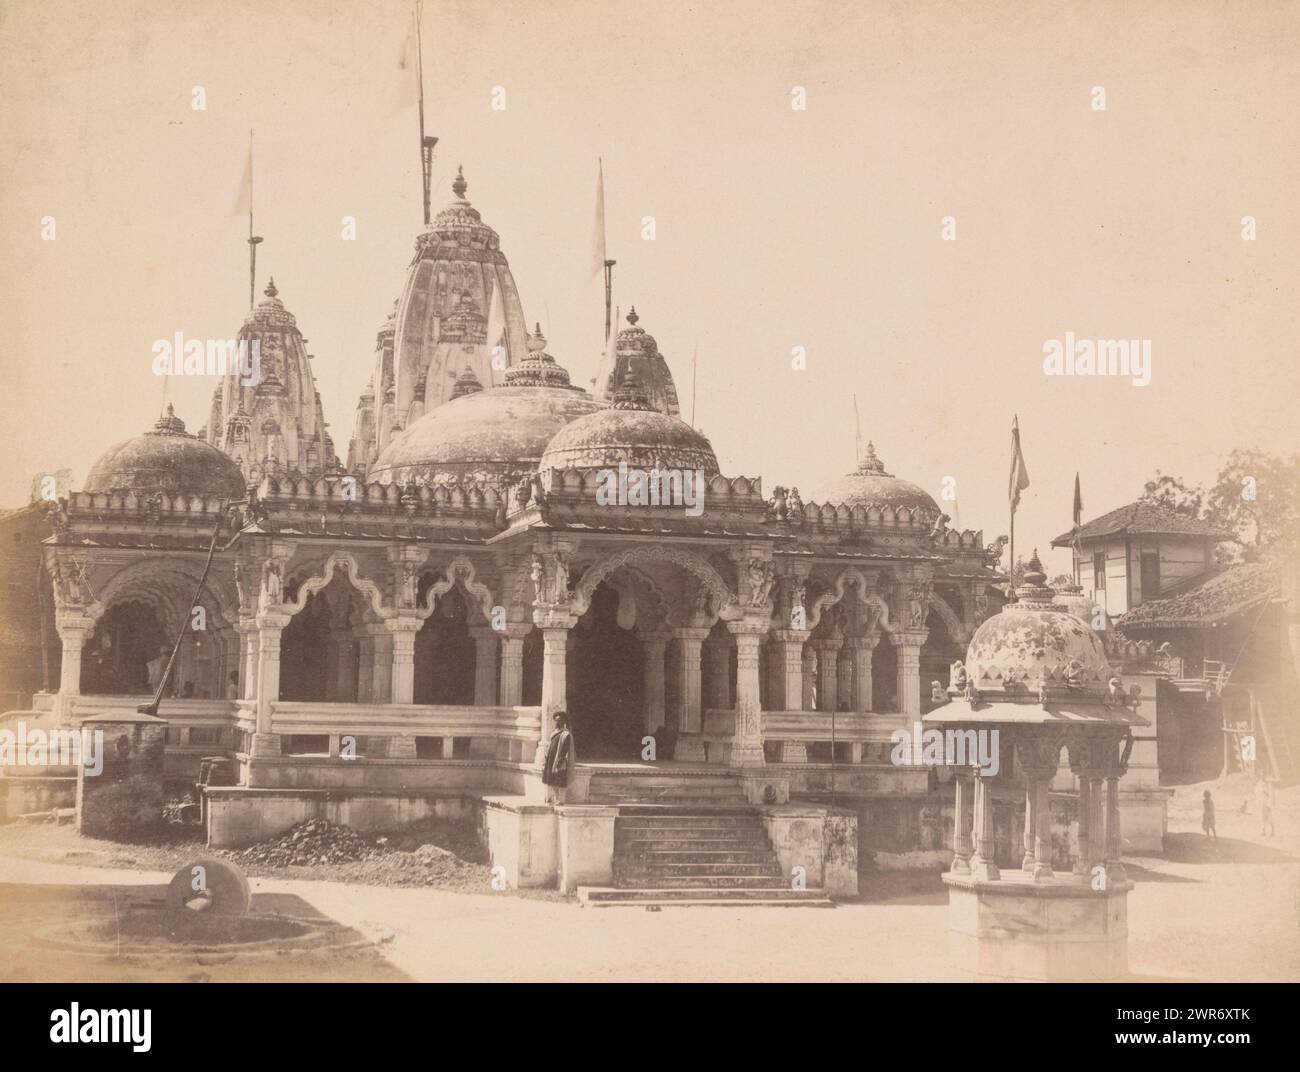 Swaminarayan Temple at Ahmedabad, Gujarat, India, anonymous, Ahmedabad, 1865 - 1890, paper, albumen print, height 180 mm × width 237 mm, height 205 mm × width 256 mm, photograph Stock Photo